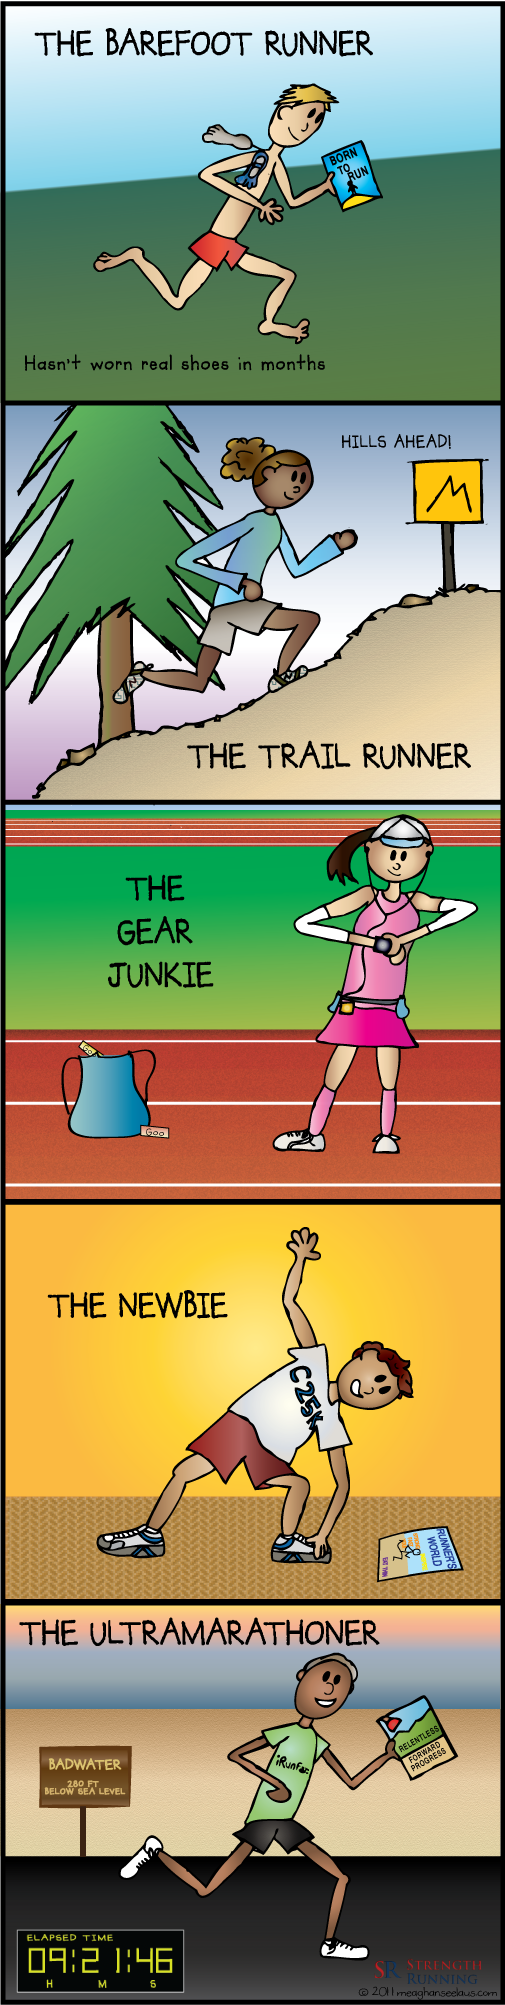 Types of Runners Infographic